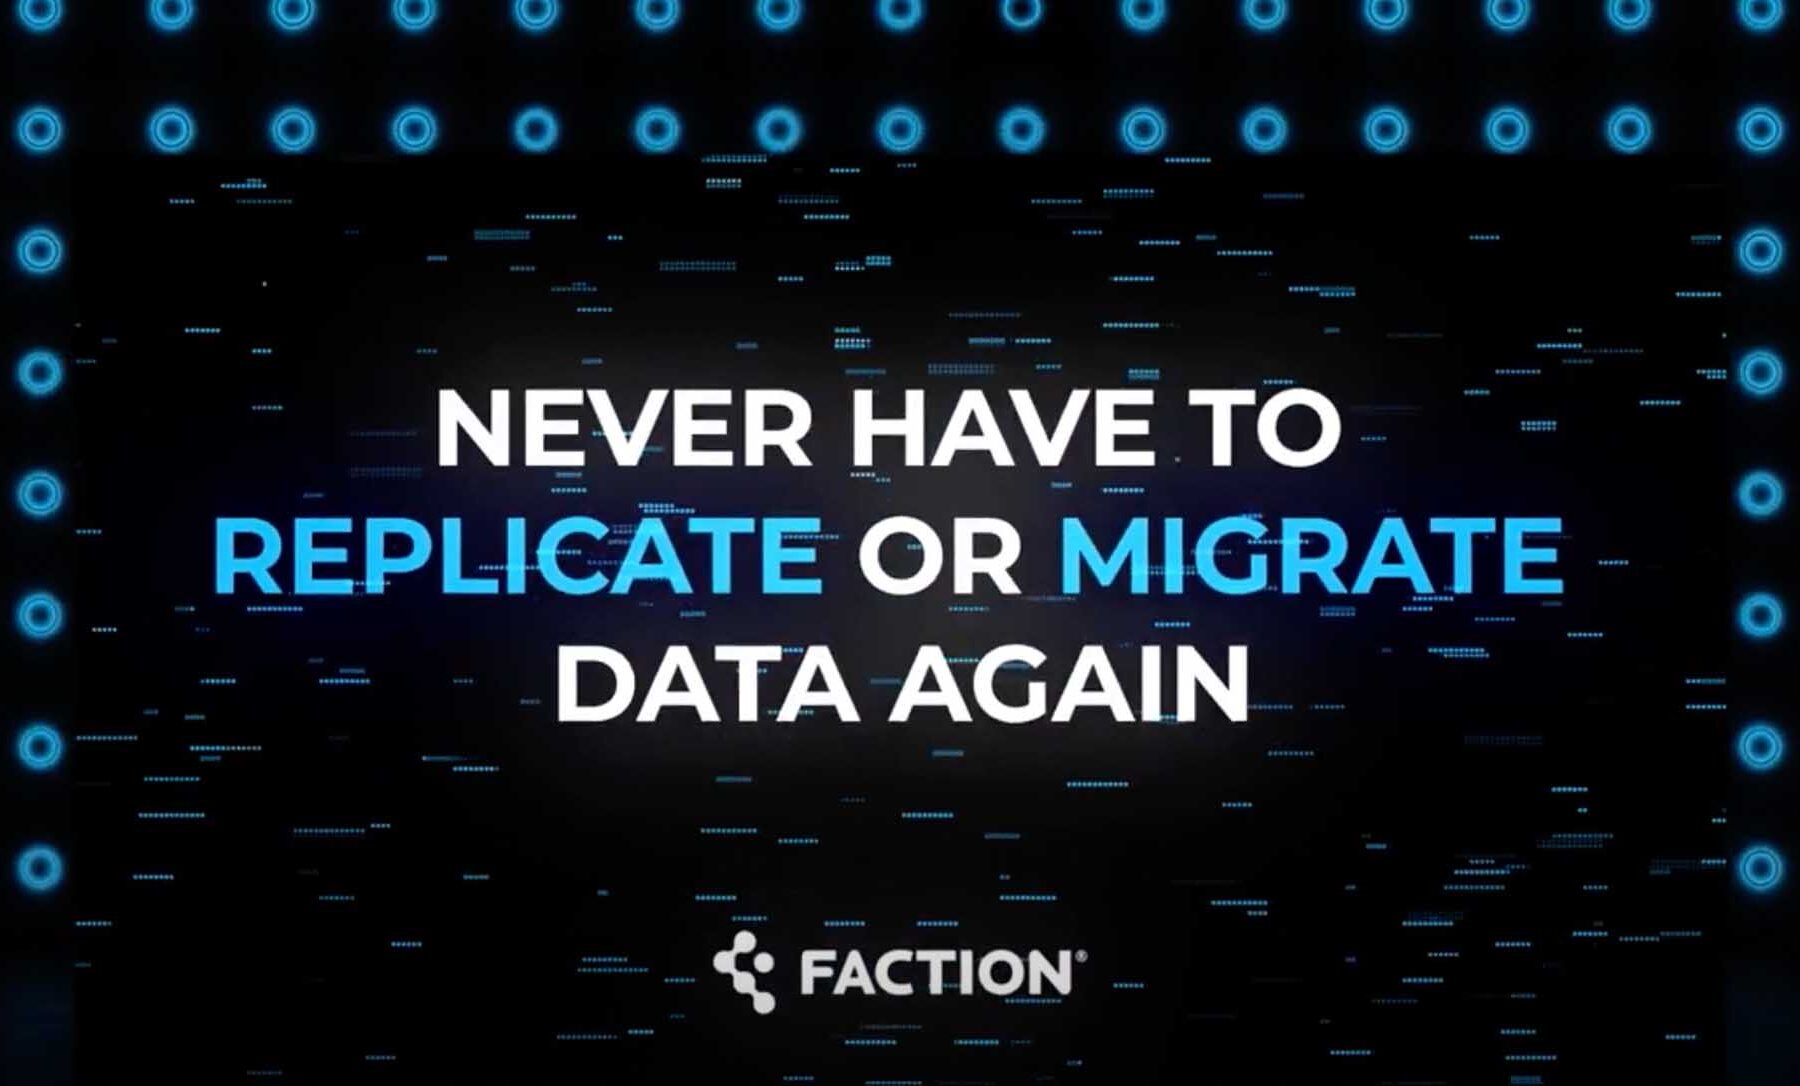 NEVER HAVE TO REPLICATE OR MIGRATE DATA AGAIN, FACTION logo